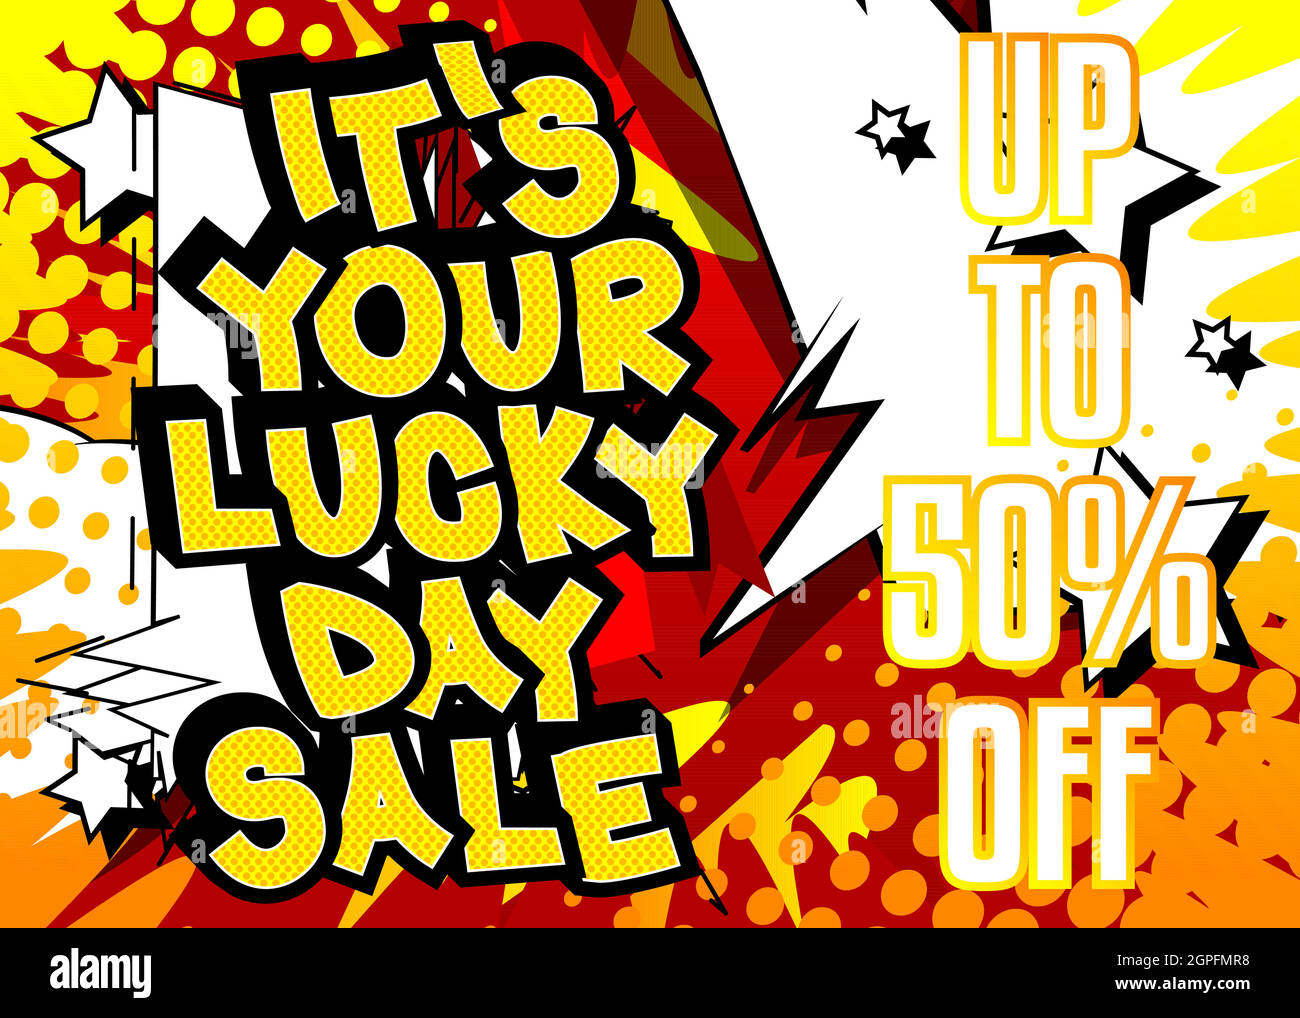 Luck related comic book style sale poster. Stock Vector